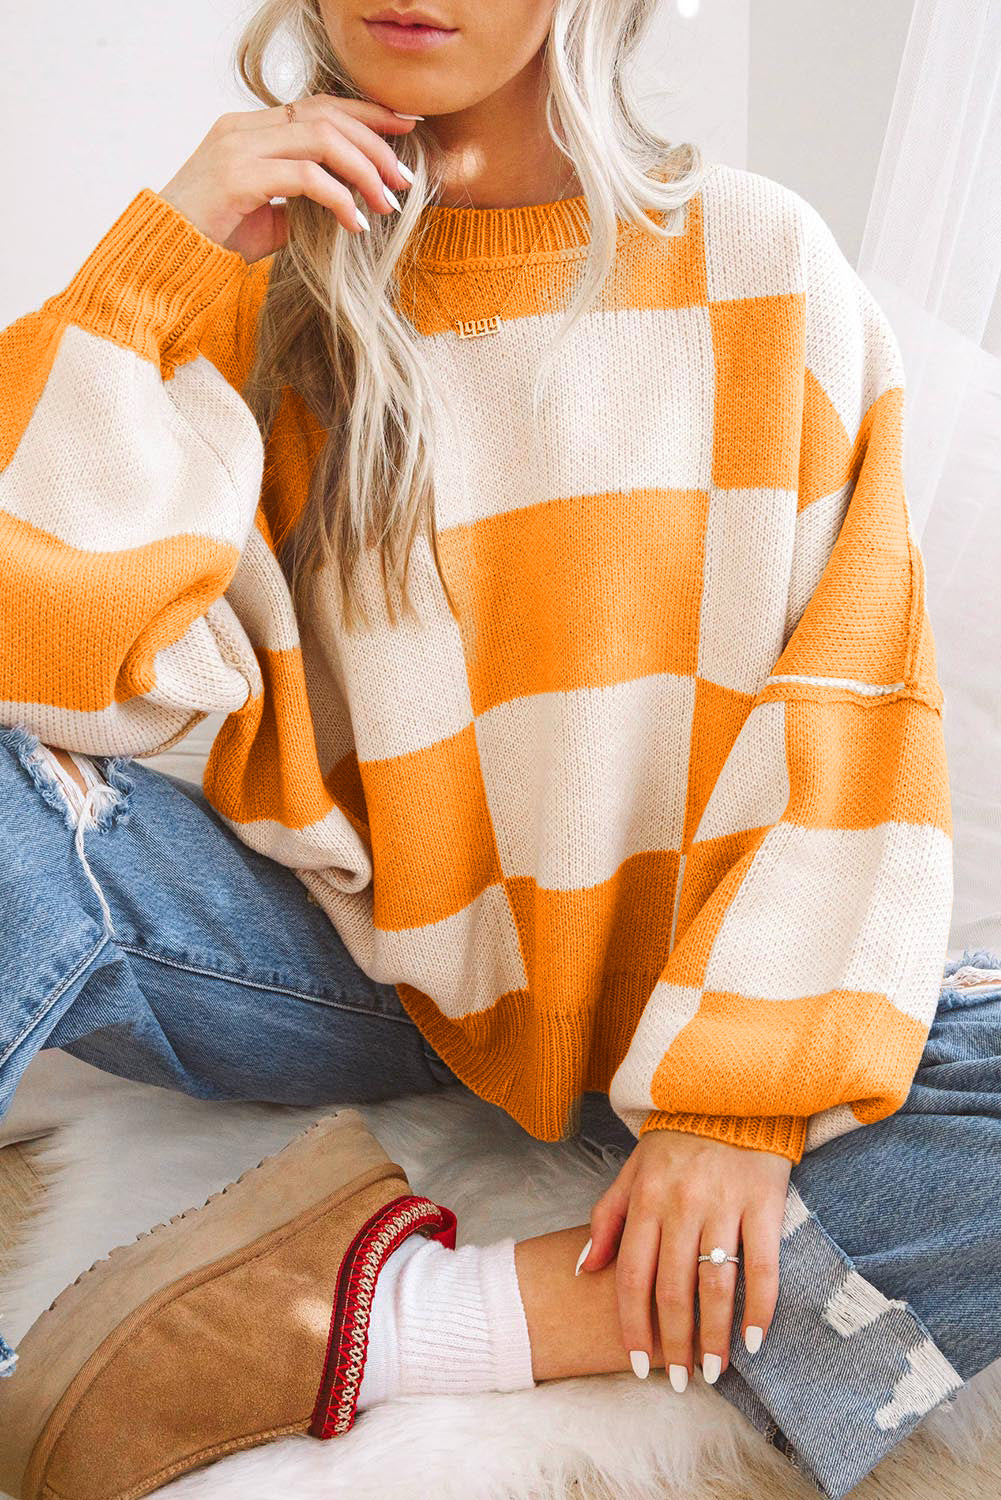 Orange Checkered Bishop Sleeve Sweater with a 30% Discount the Price is $80.47 ($34.49 Savings)